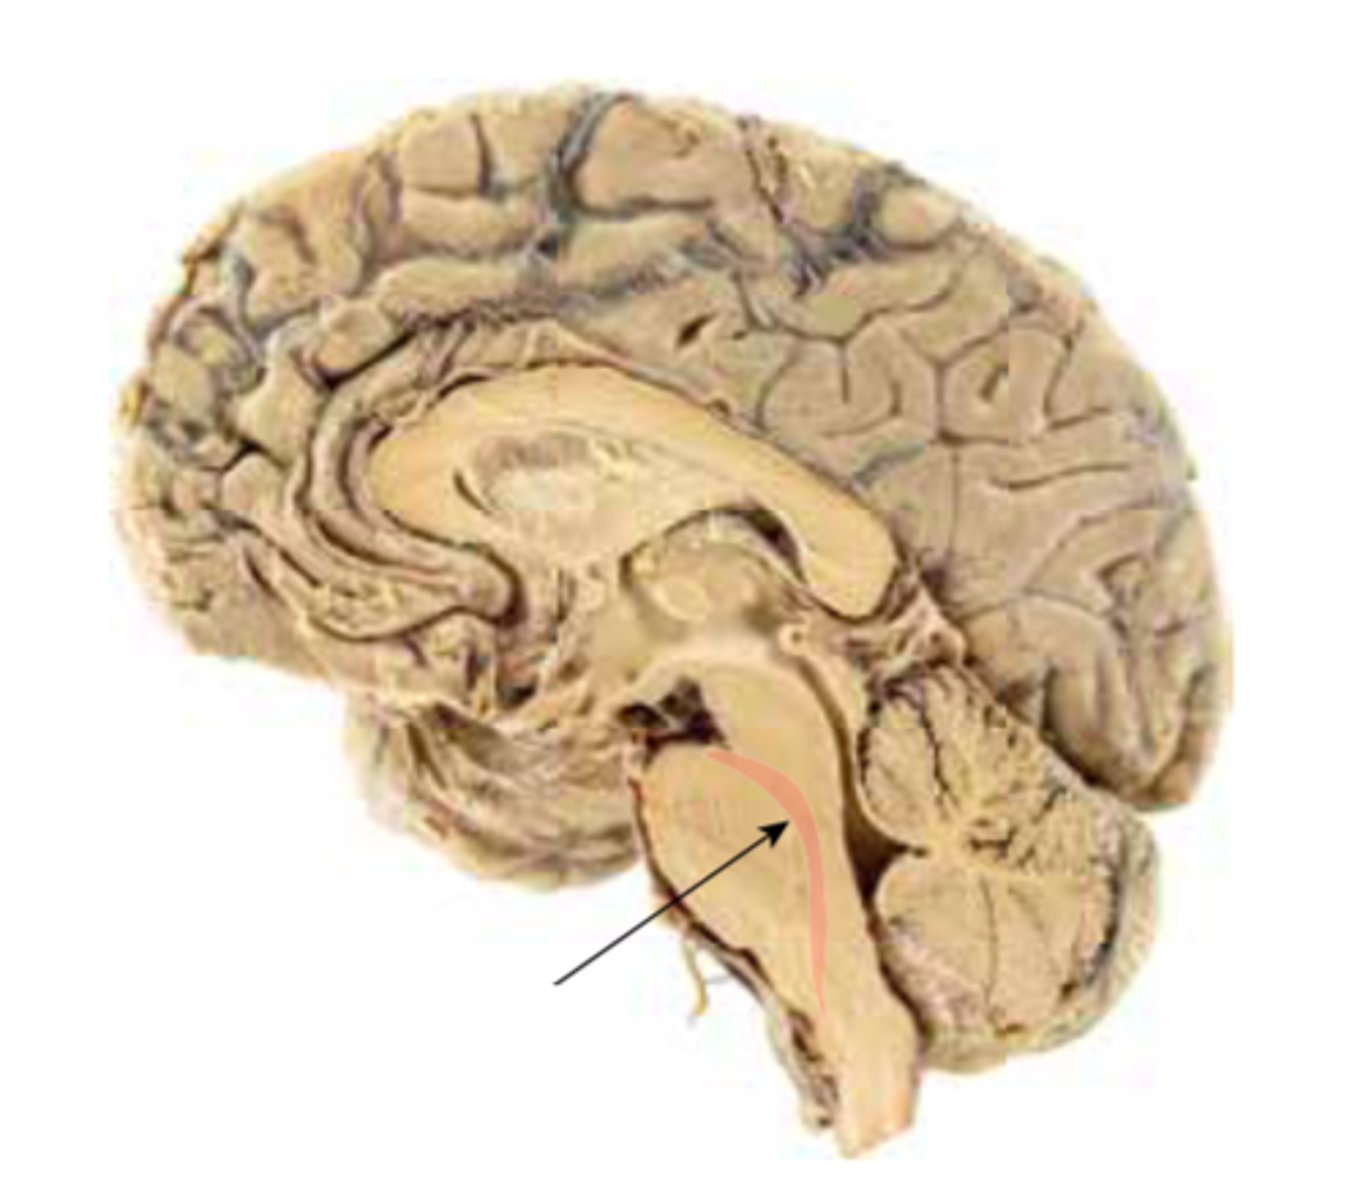 <p>band of nerve fibers that run through the center of the brain stem; important in controlling arousal levels</p>